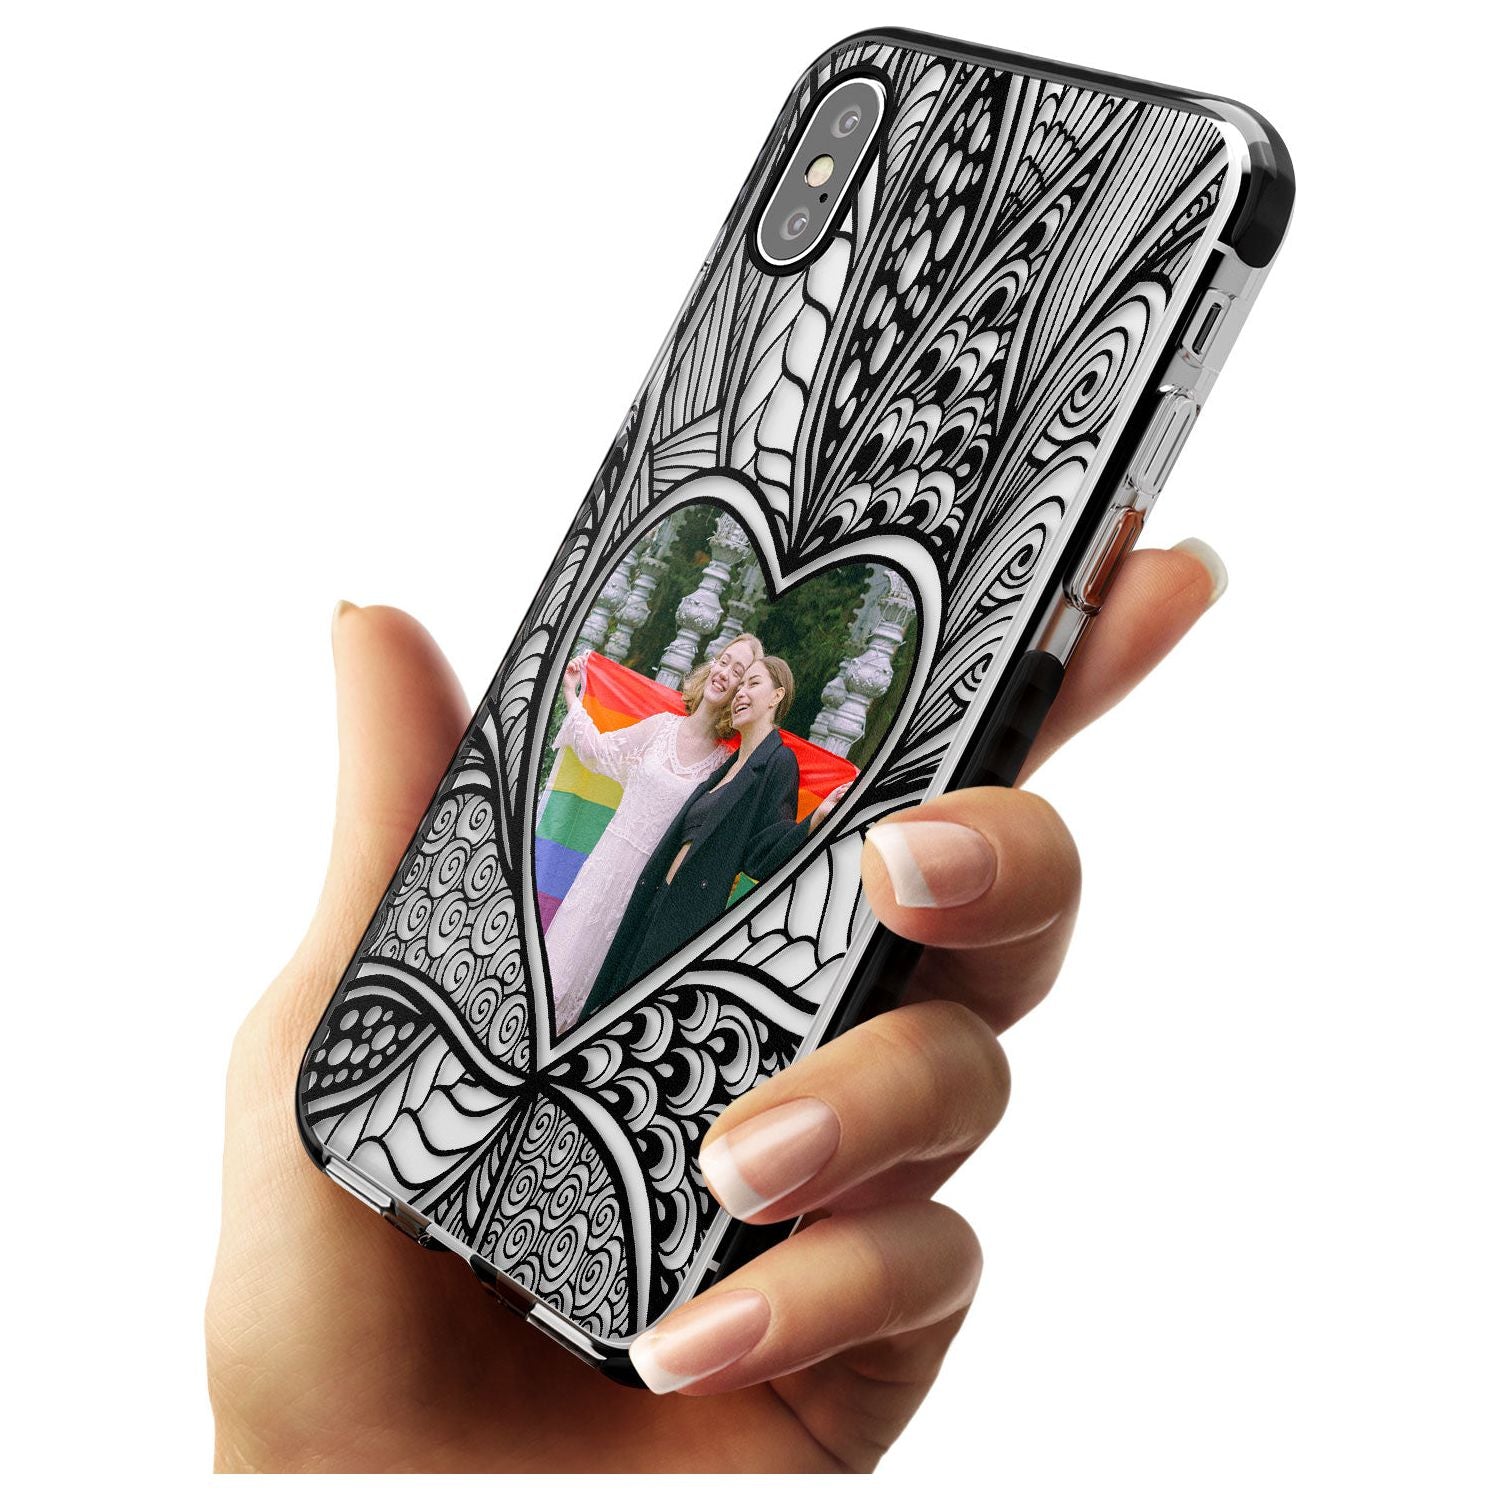 Personalised Henna Heart Photo Case Black Impact Phone Case for iPhone X XS Max XR